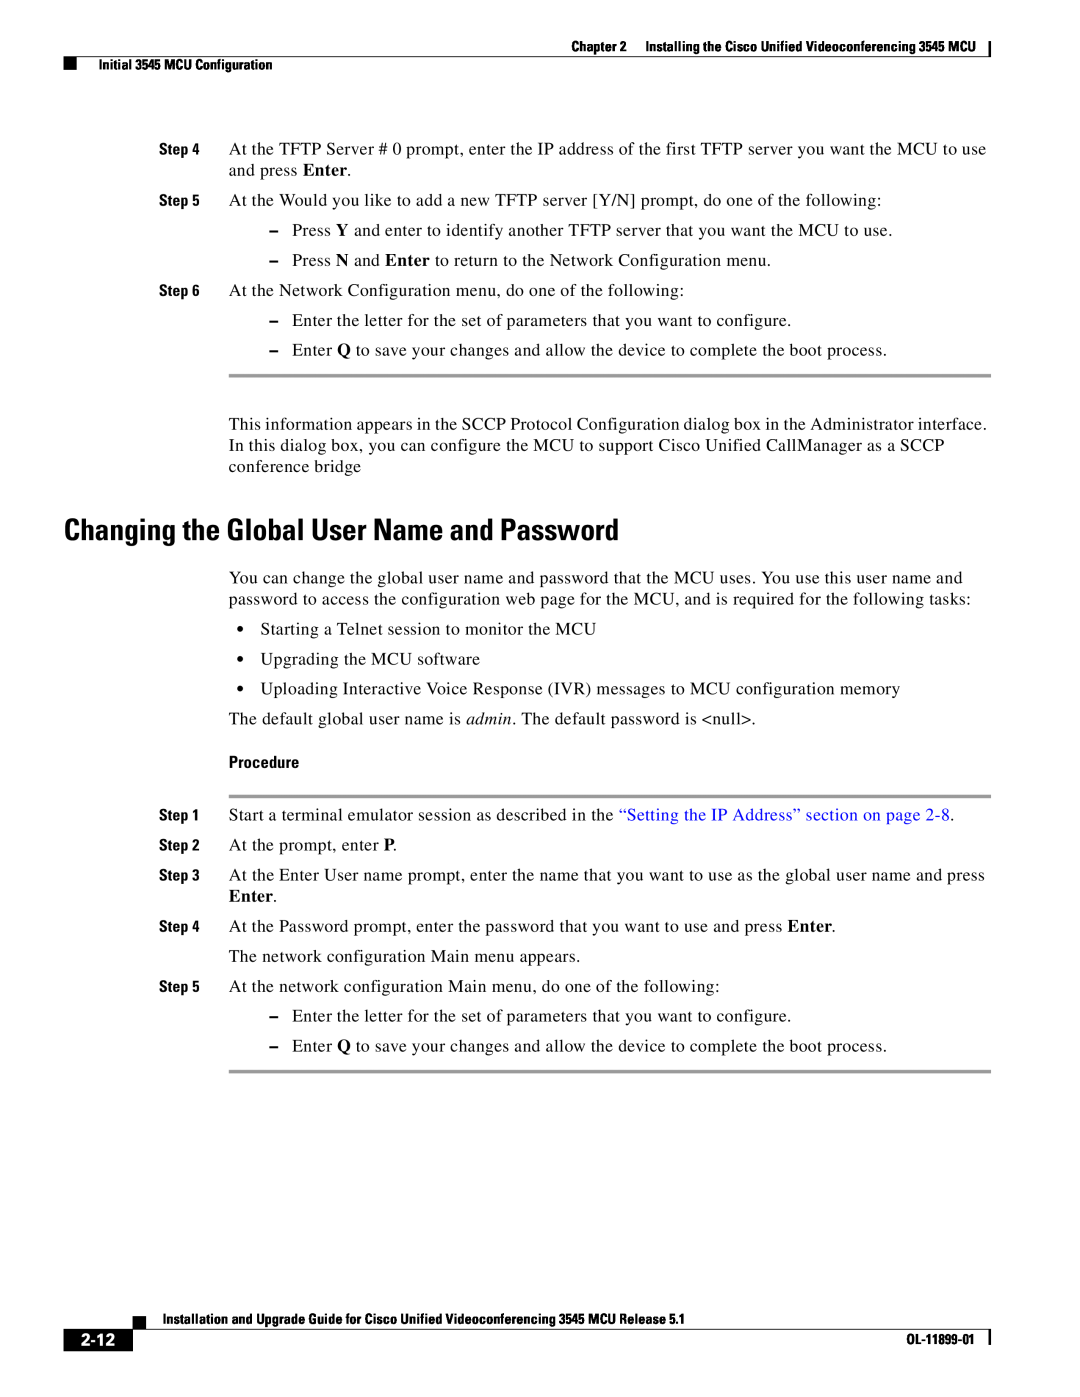 Cisco Systems 3545 MCU manual Changing the Global User Name and Password, Procedure, 2-12 